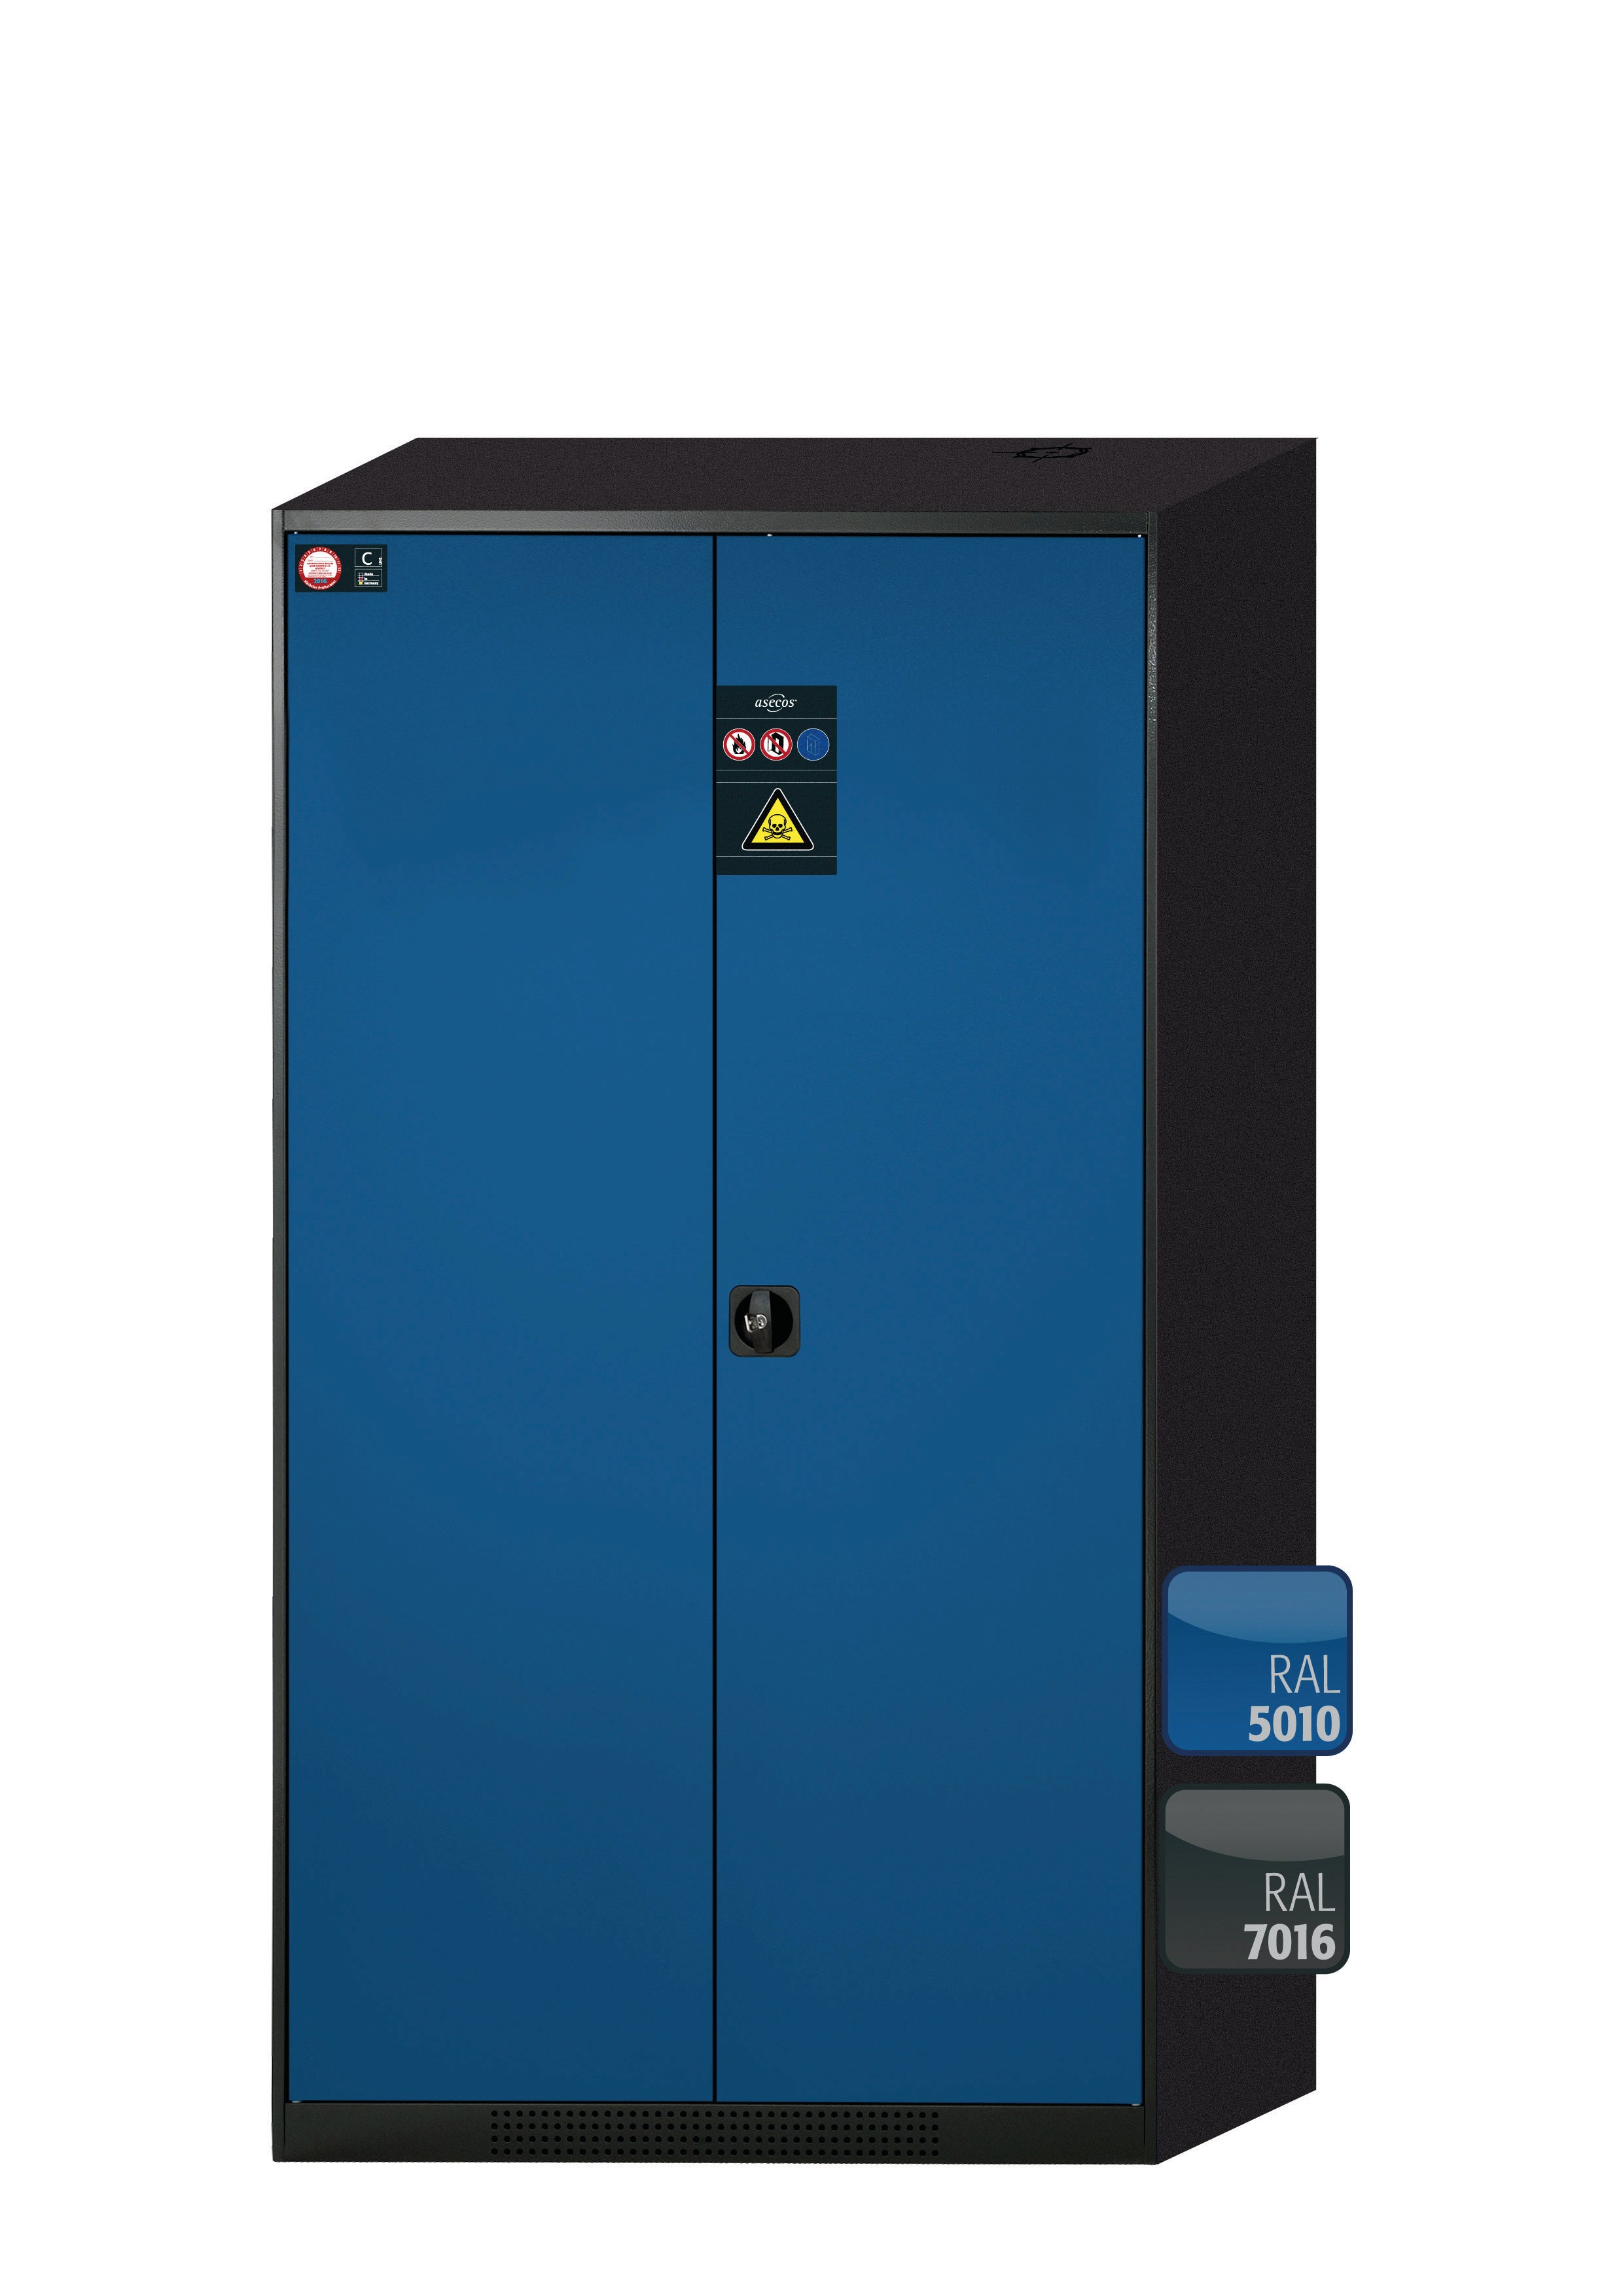 Chemical cabinet CS-CLASSIC model CS.195.105 in gentian blue RAL 5010 with 4x AbZ pull-out shelves (sheet steel/polypropylene)